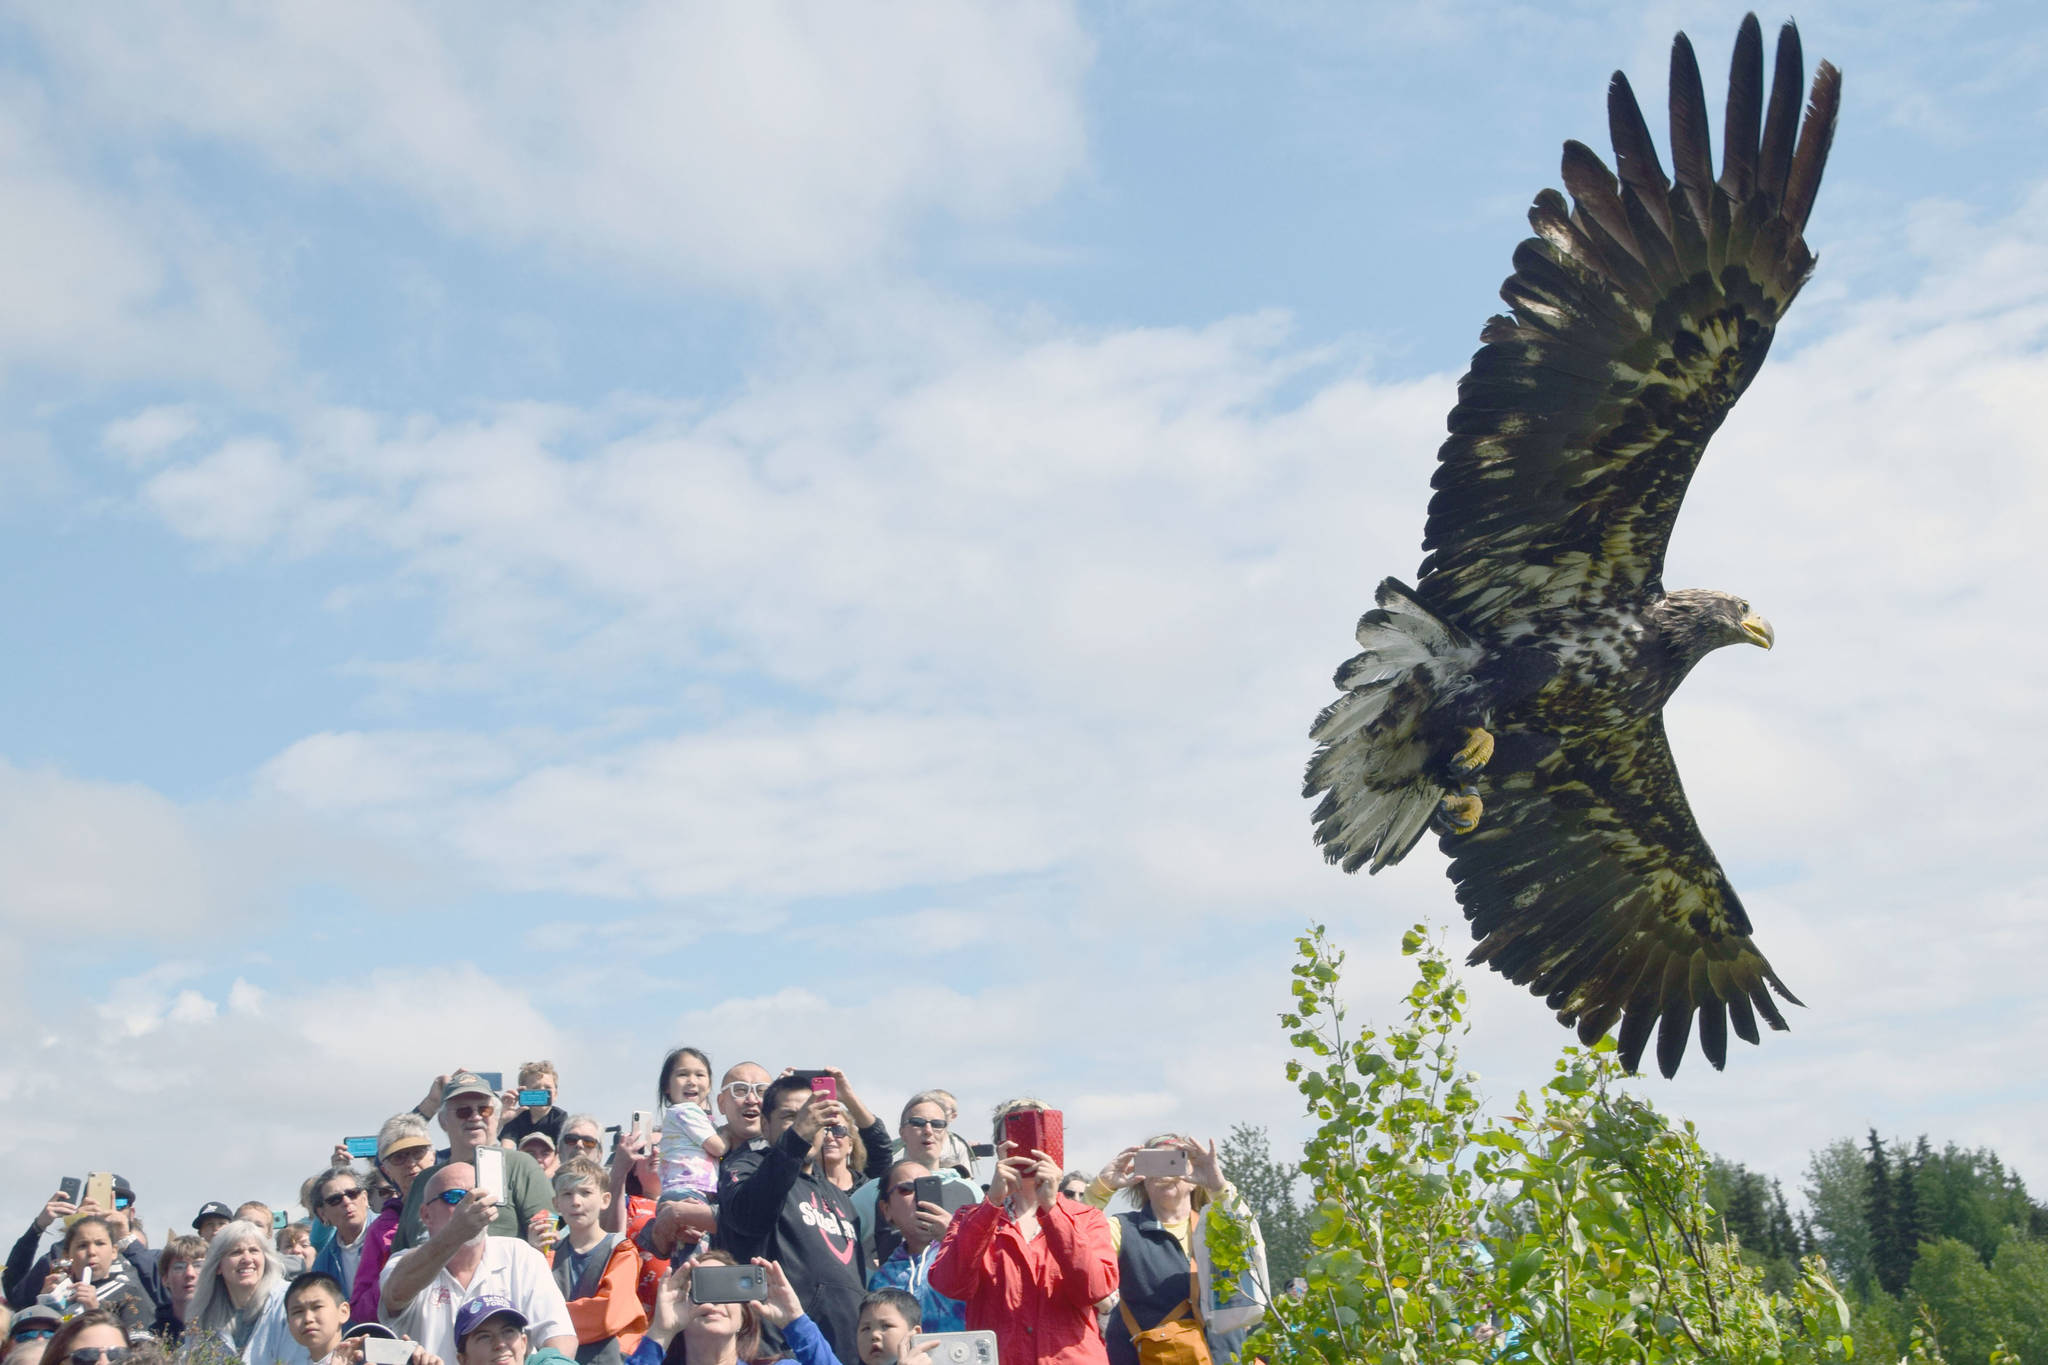 A juvenile bald eagle that was rehabilitated by the Bird Treatment and Learning Center is released into the wild during the Kenai River Festival at Soldotna Creek Park in Soldotna on June 8, 2019.